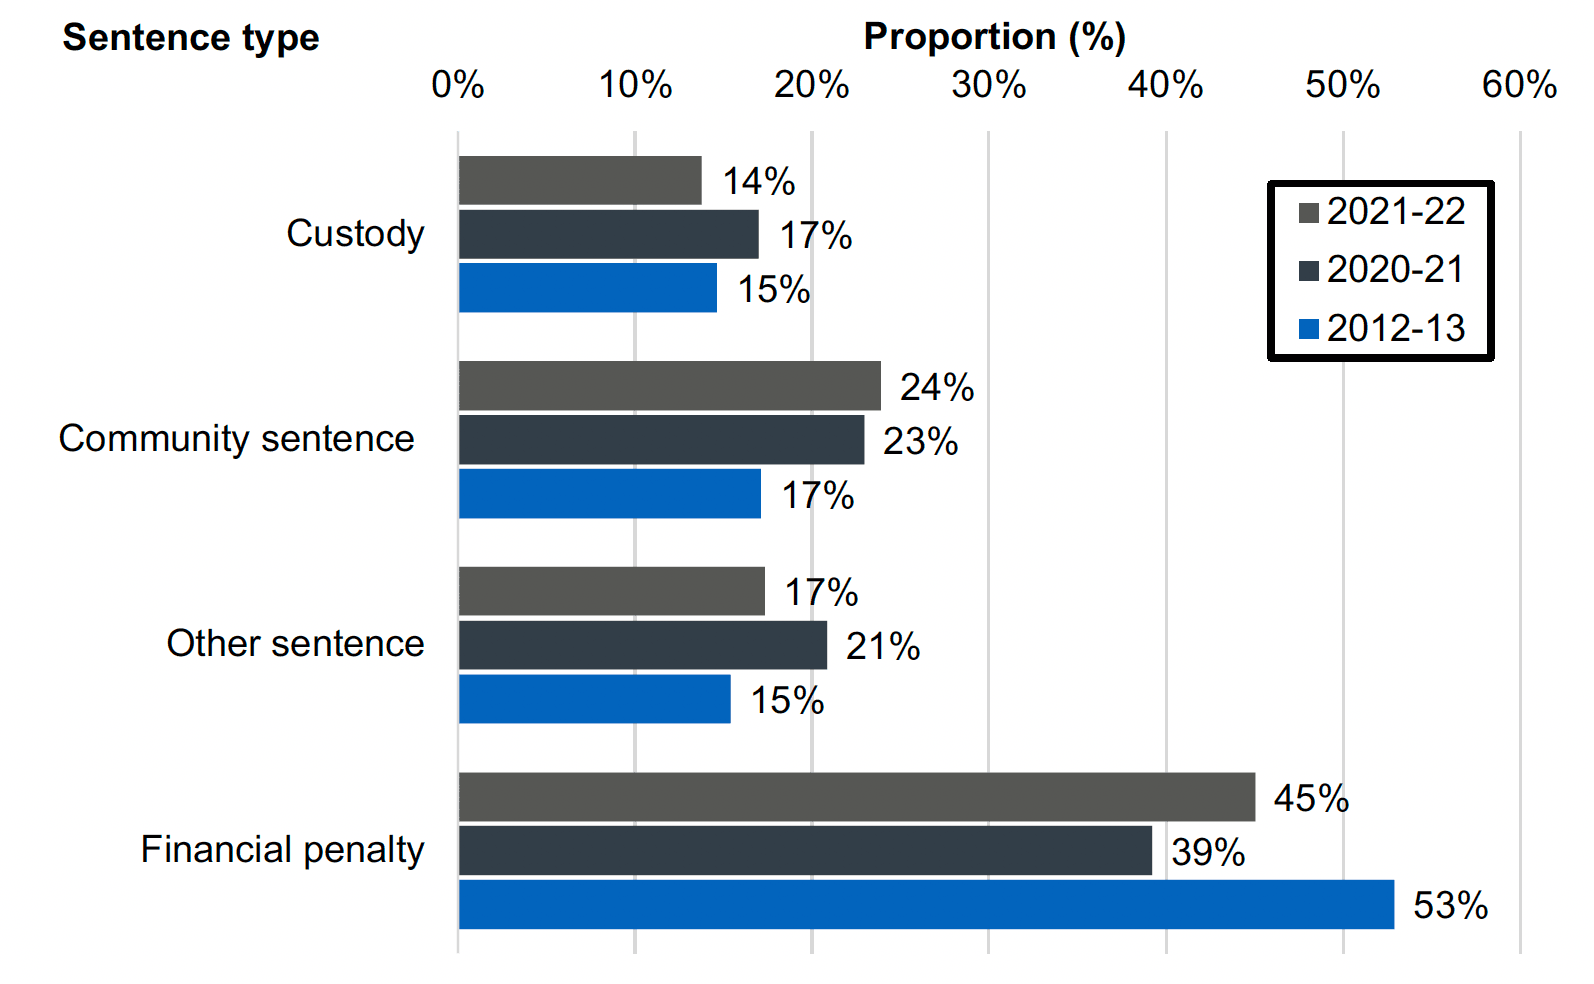 A clustered bar chart showing the proportion of sentence types imposed in 2012-13, 2020-21 and 2021-22. The highest proportion for each three years was Financial penalty, at 53%, 39% and 45% respectively. The proportion of Community sentences has increased, from 17%, to 23% and finally 24%. The proportion of Custody sentences has fluctuated, from 15% to 17%, and finally 14%.